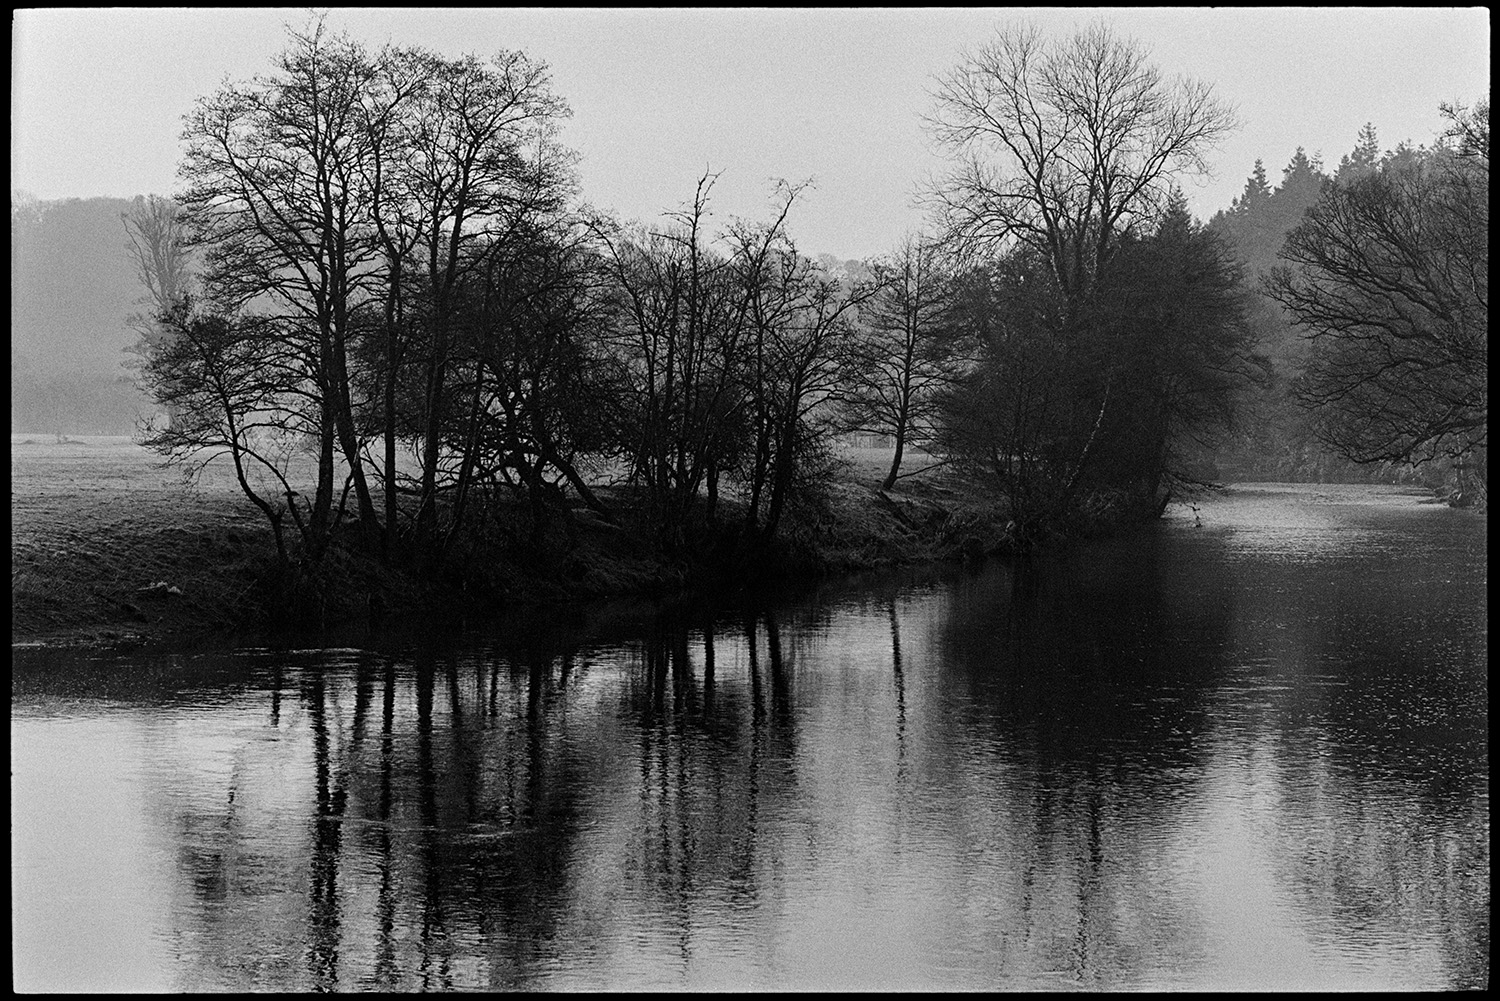 River bank with trees, early morning, large oaks against light. 
[Trees and fields on the banks of the River Torridge in the morning, at Halsdon, Dolton. Reflections of the trees can be seen in the river.]